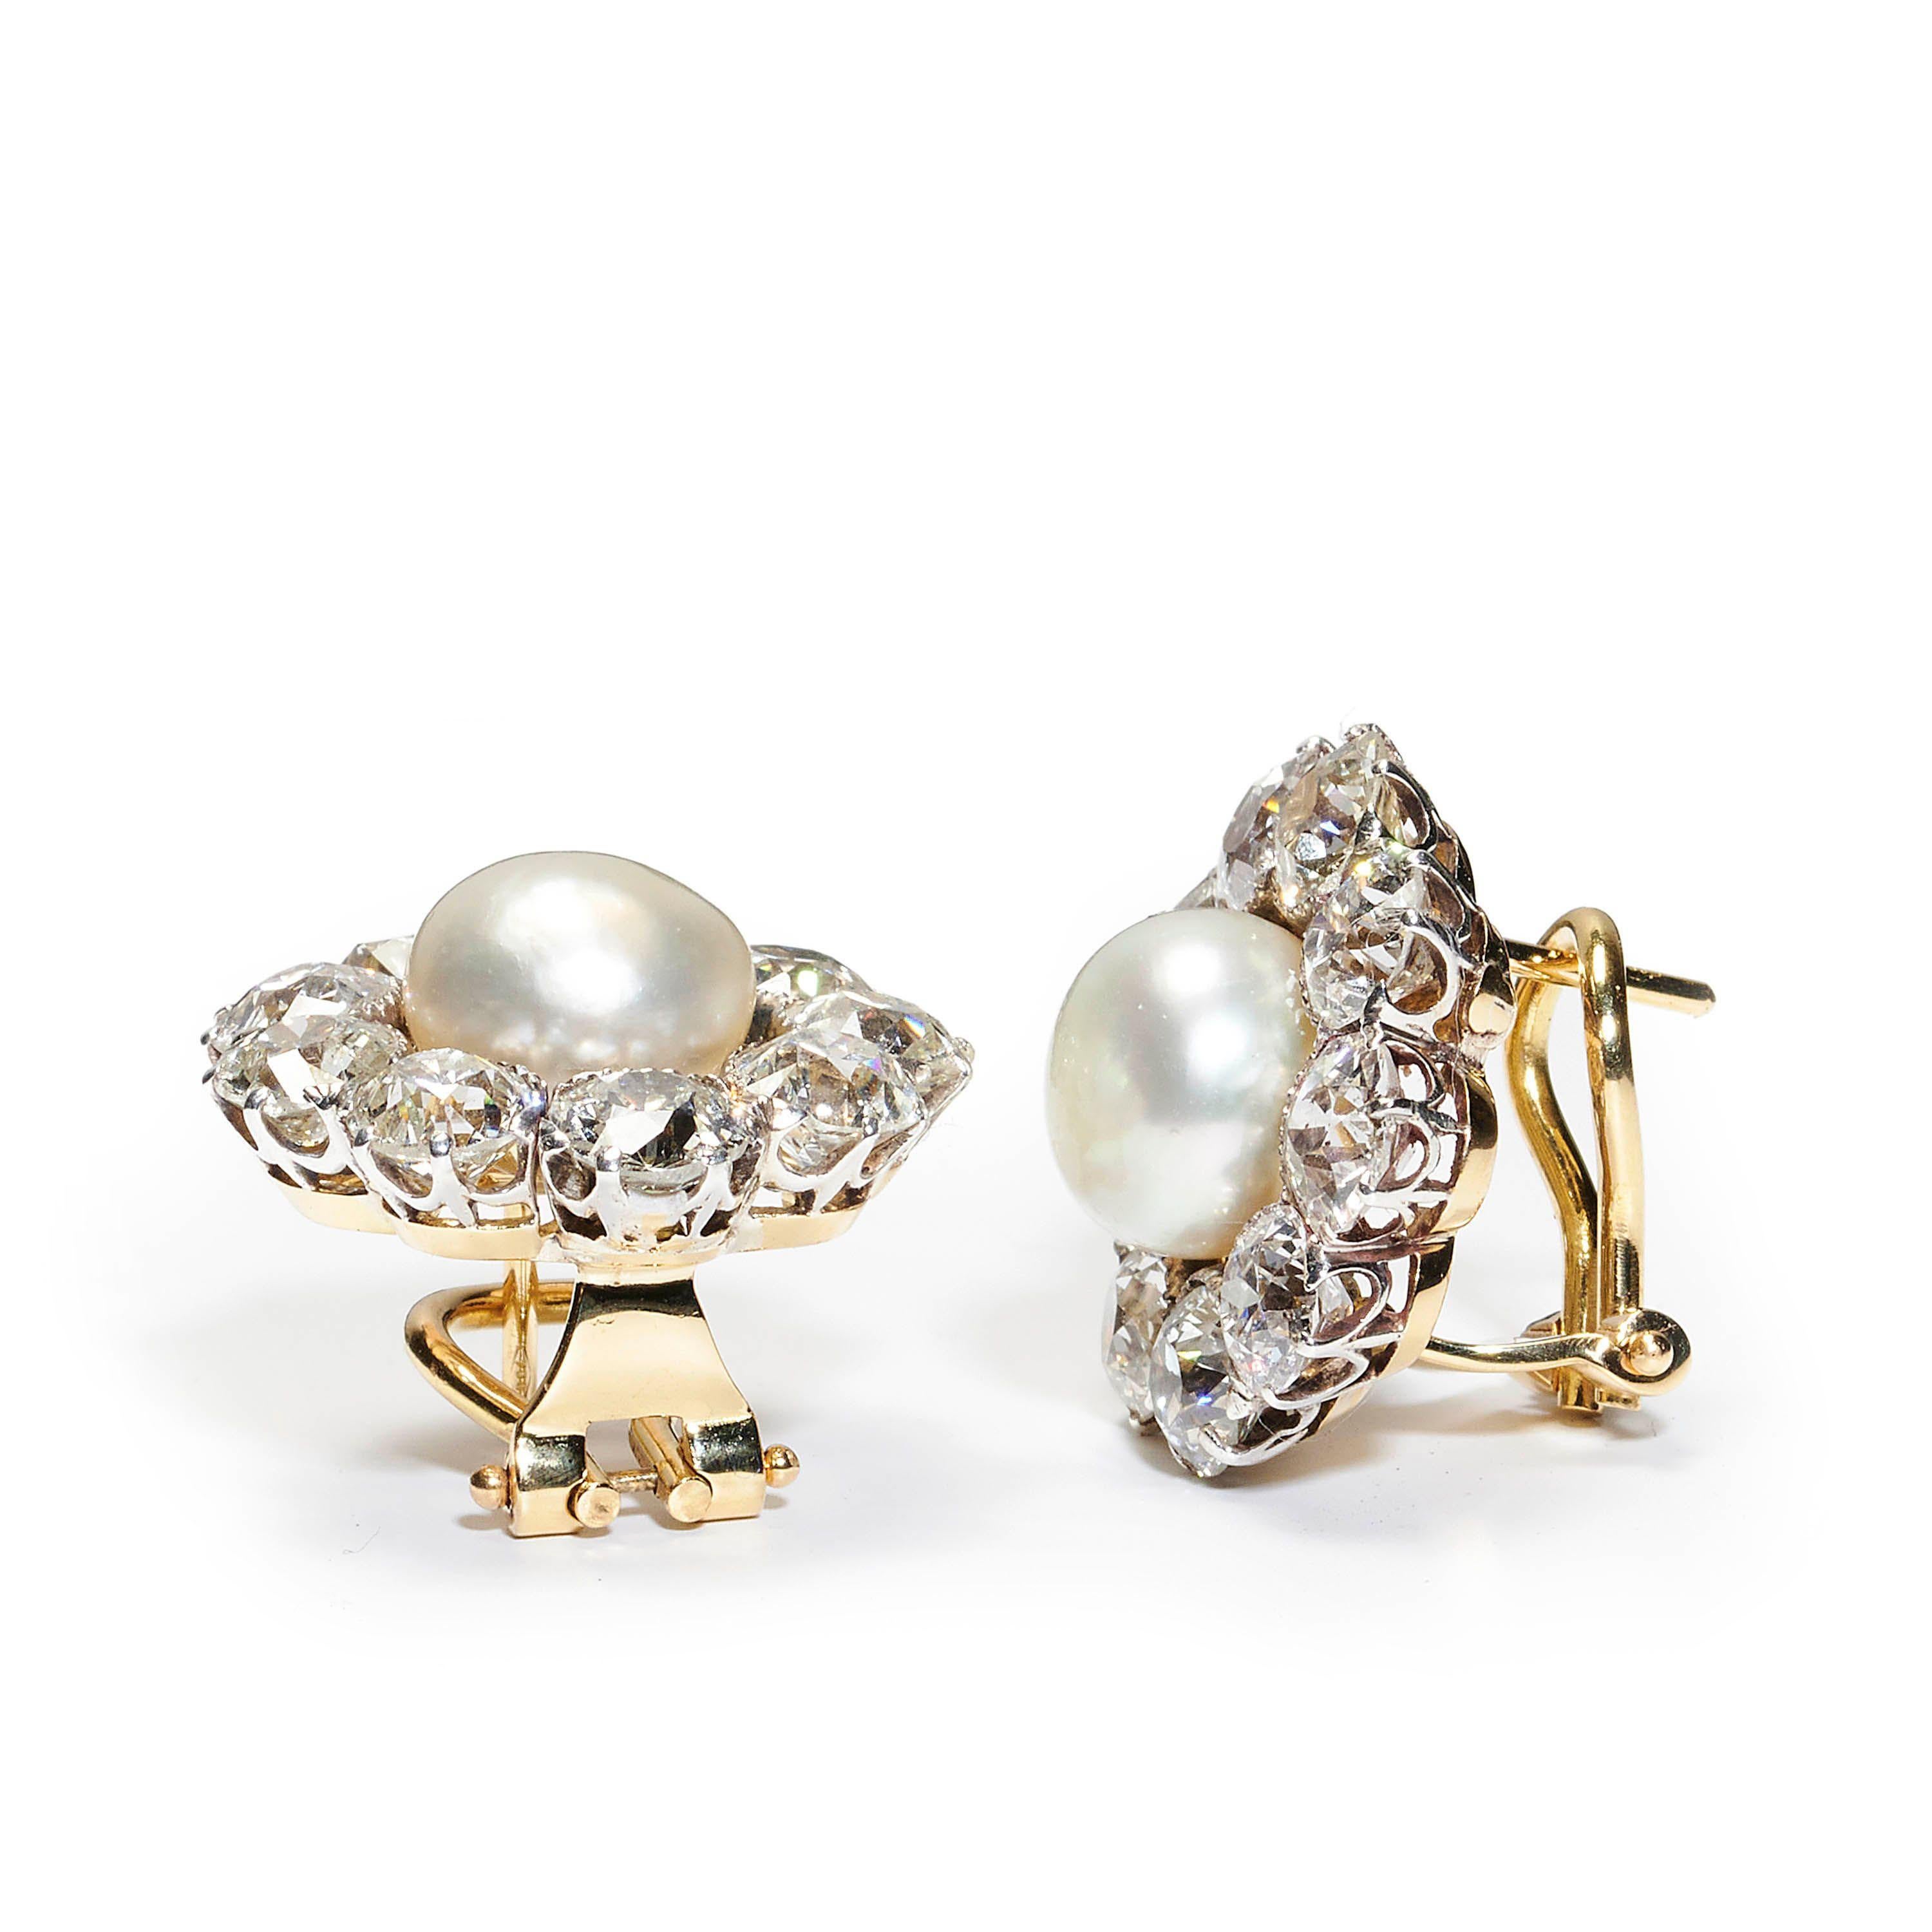 An antique pair of natural pearl and diamond cluster earrings, with bouton shaped natural pearls in the centre of a cluster of nine, European old-cut diamonds, with an estimated total weight of 10.00ct, in platinum crown claw settings, on gold